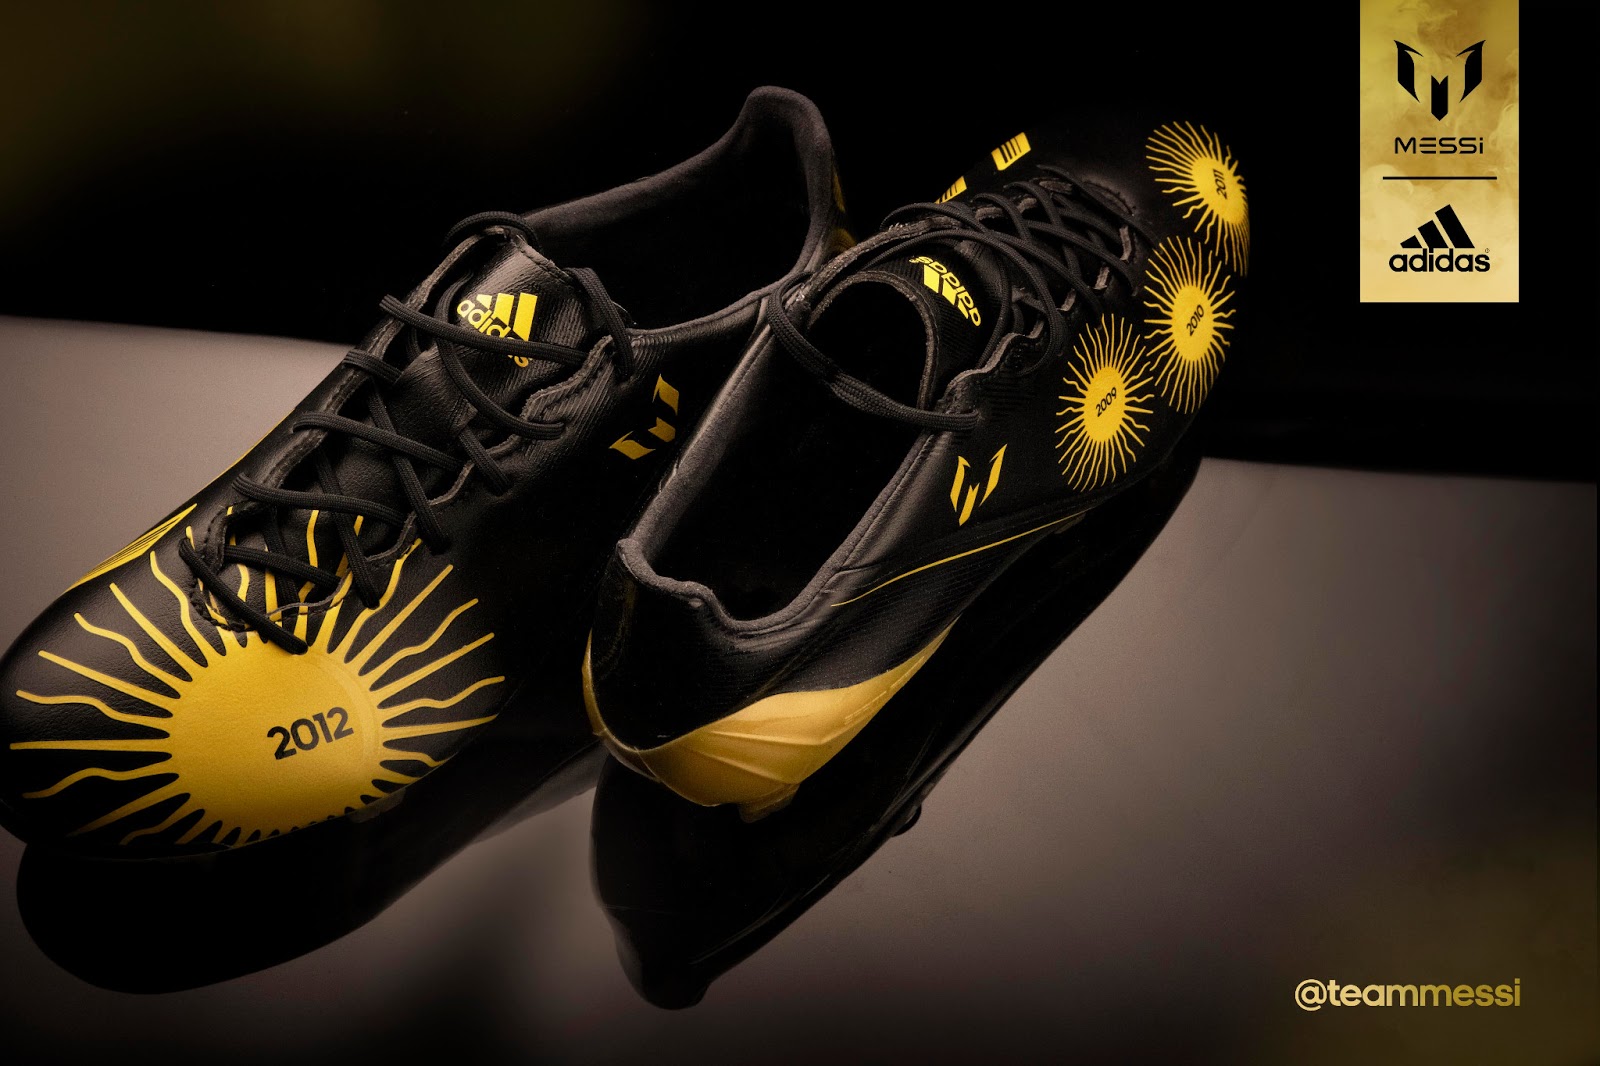 Messi Exclusive Ballon d'Or 2012 Boots Unveiled - Footy Headlines1600 x 1066